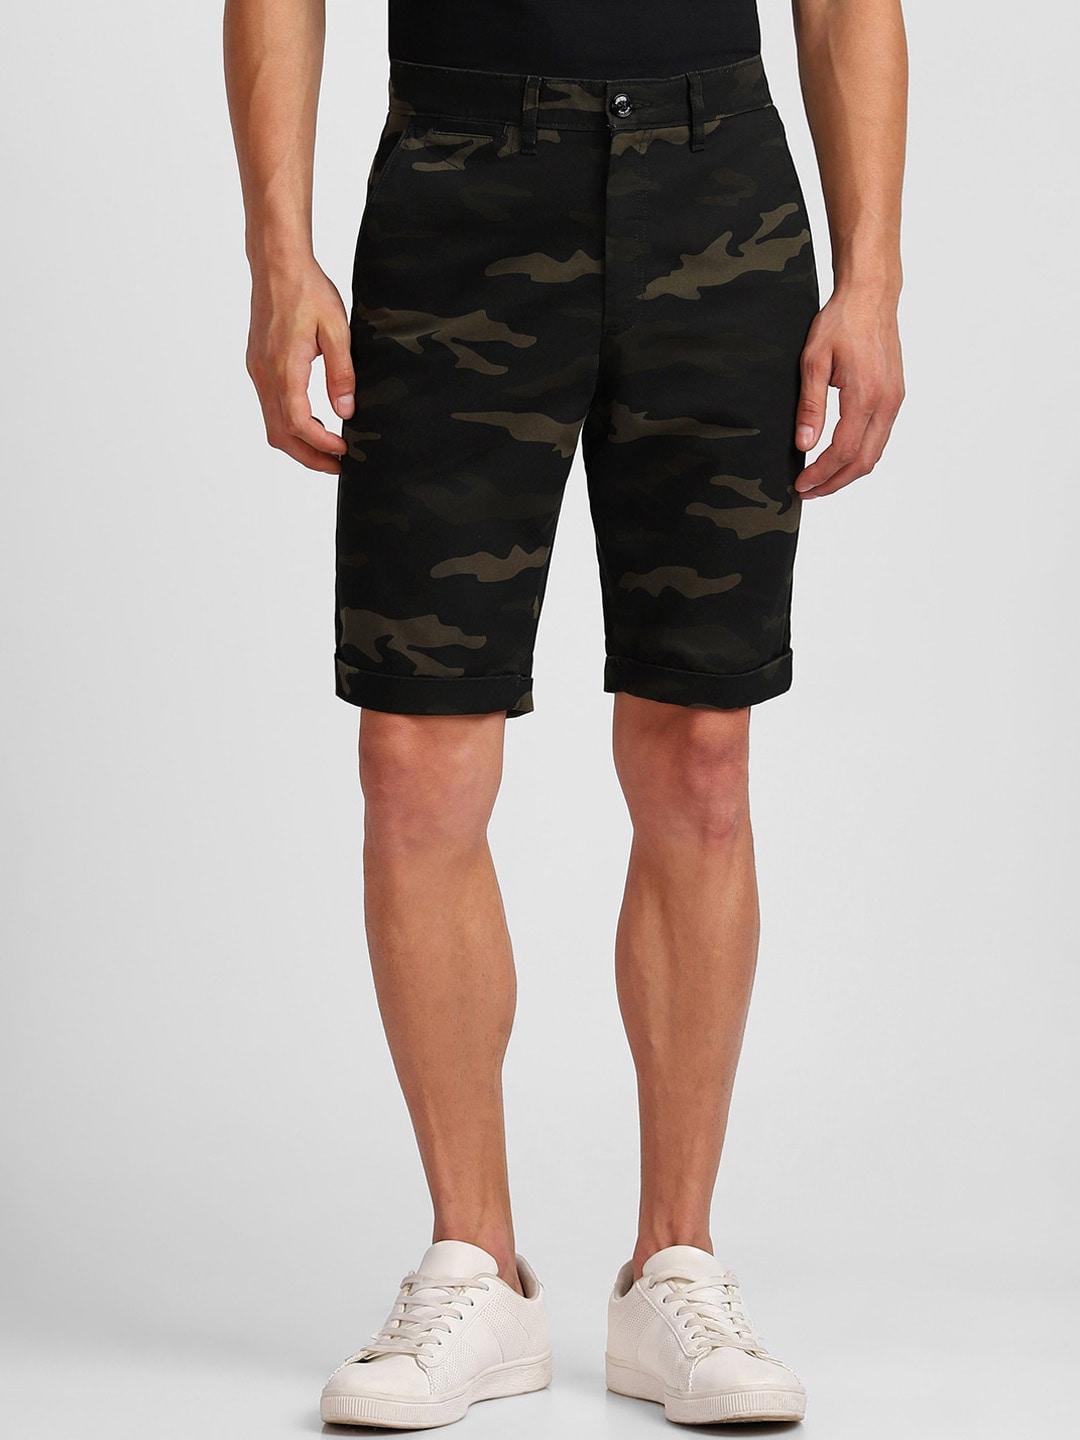 allen-solly-men-camouflage-printed-cotton-slim-fit-shorts